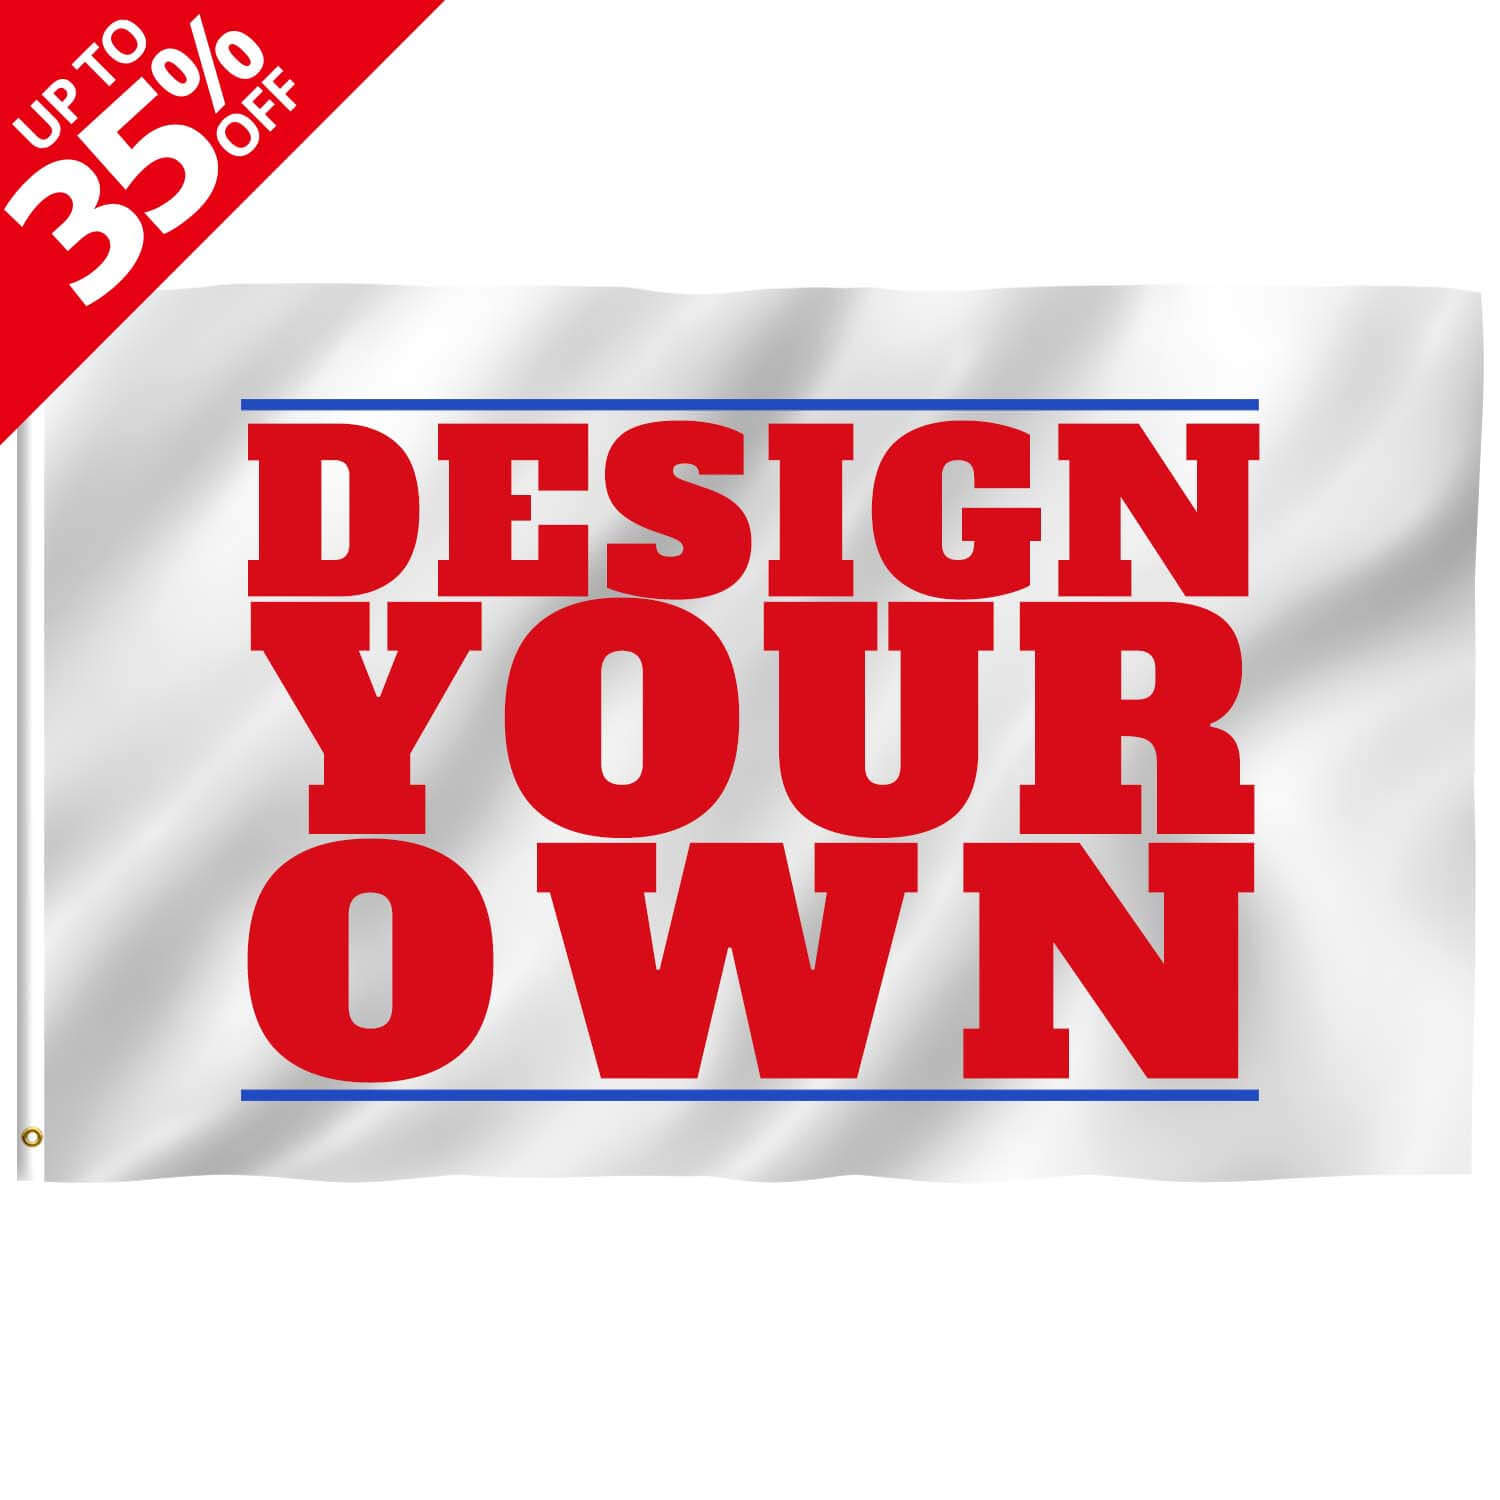 2x3 JOB FAIR Red /& White Banner Sign NEW Discount Size /& Price FREE SHIP